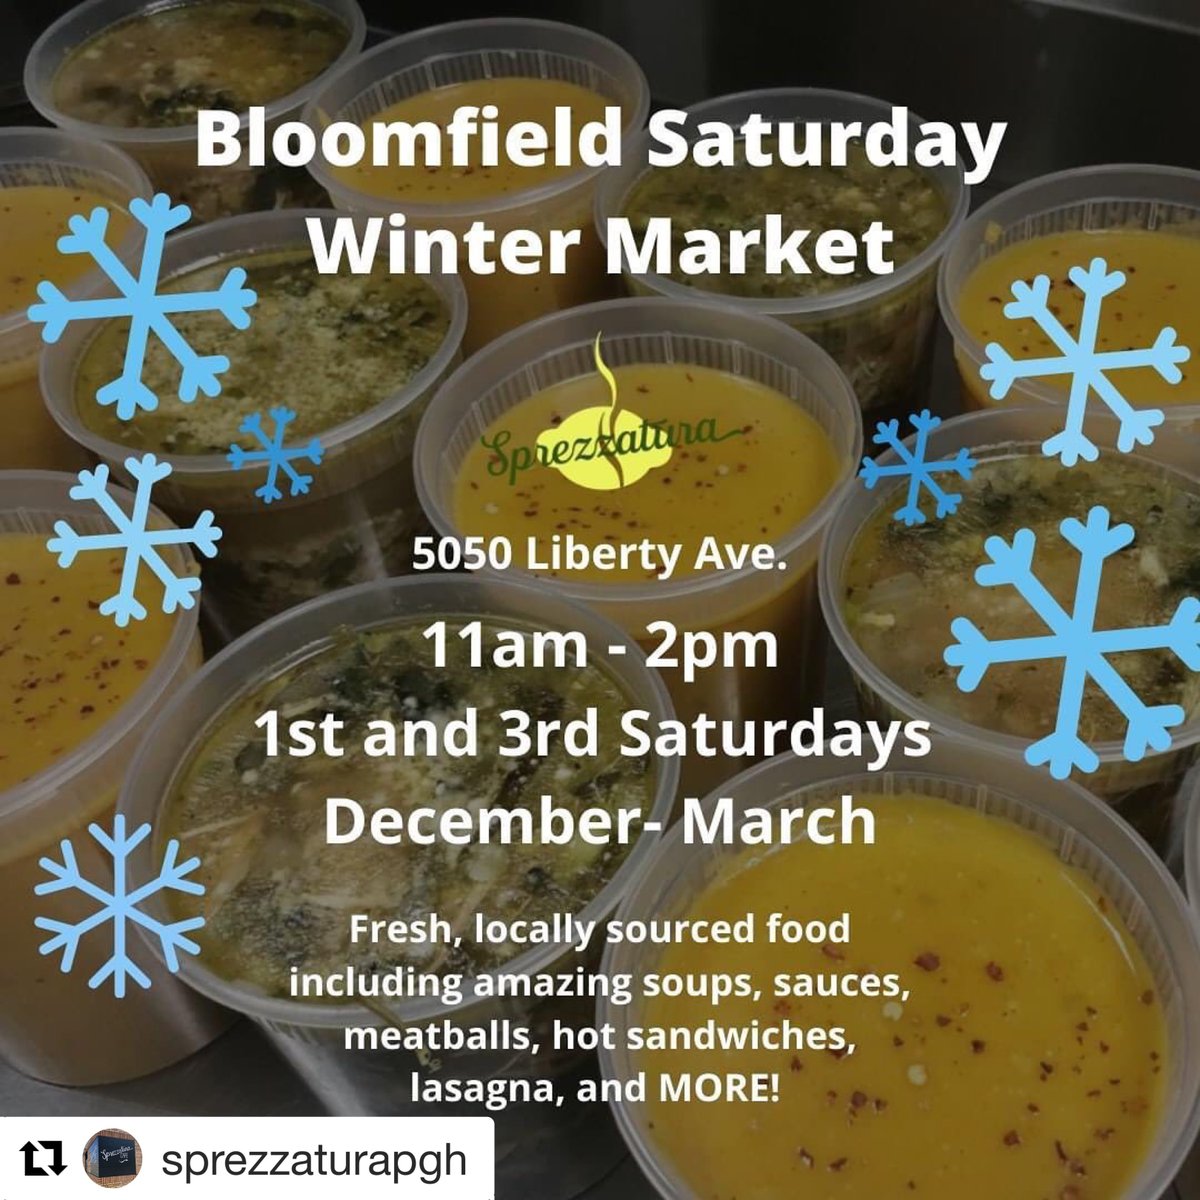 When you’re done at Rohrich Honda, check out our friends @sprezzaturapgh at the Bloomfield Market! #rohrichhonda #rohrichautomotive #bloomfieldmarket